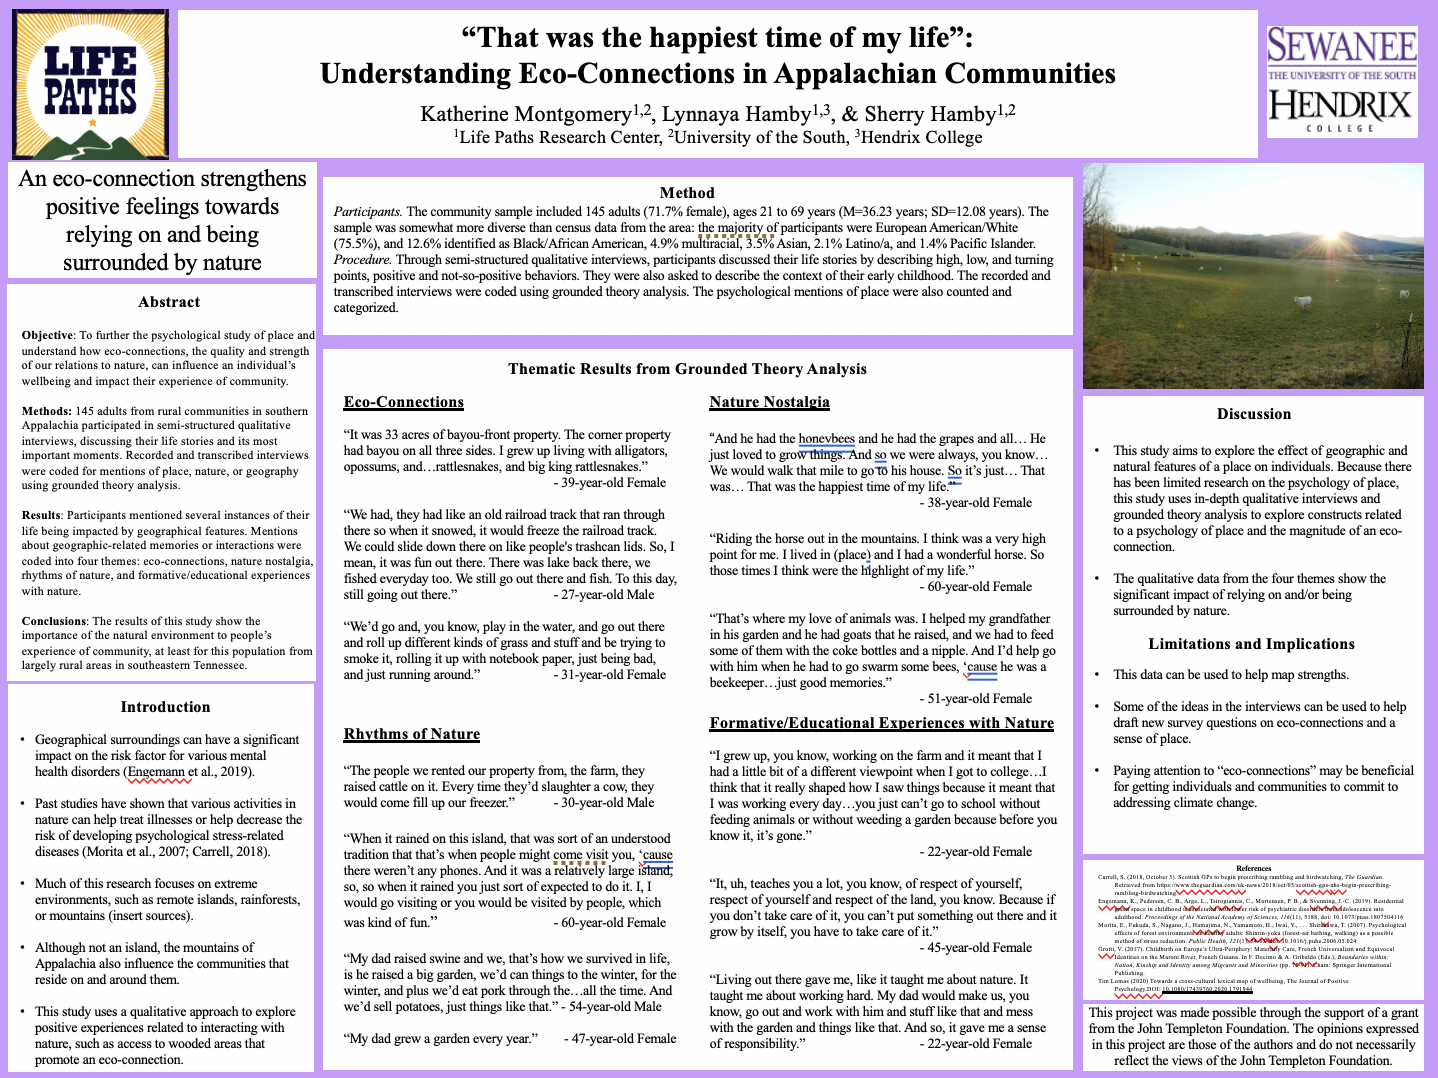 Showcase Image for “That was the happiest time of my life”: Understanding Eco-Connections in Appalachian Communities